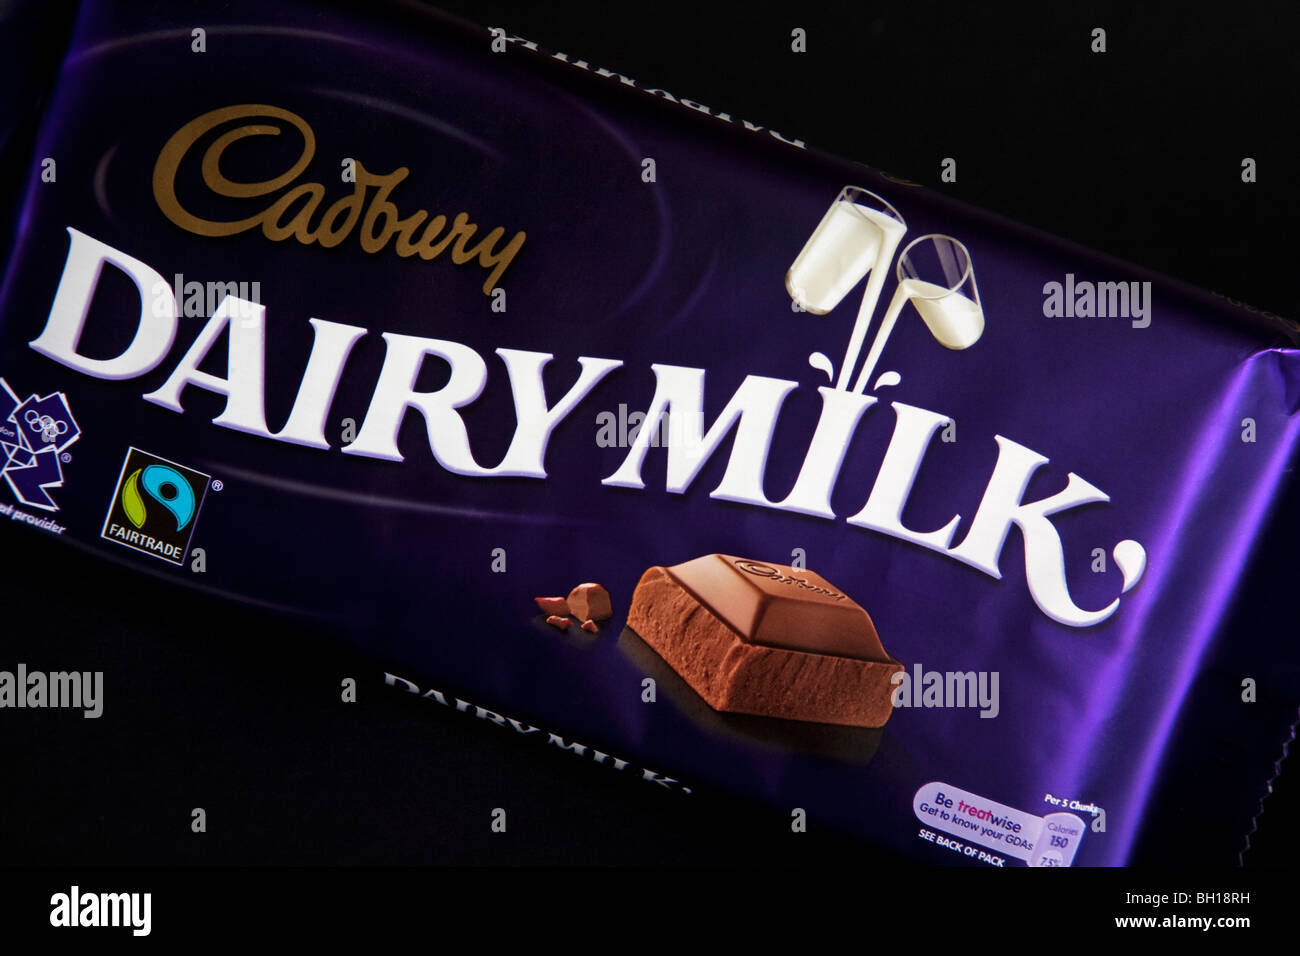 Chocolate Images Hd Dairy Milk Real - Fititnoora